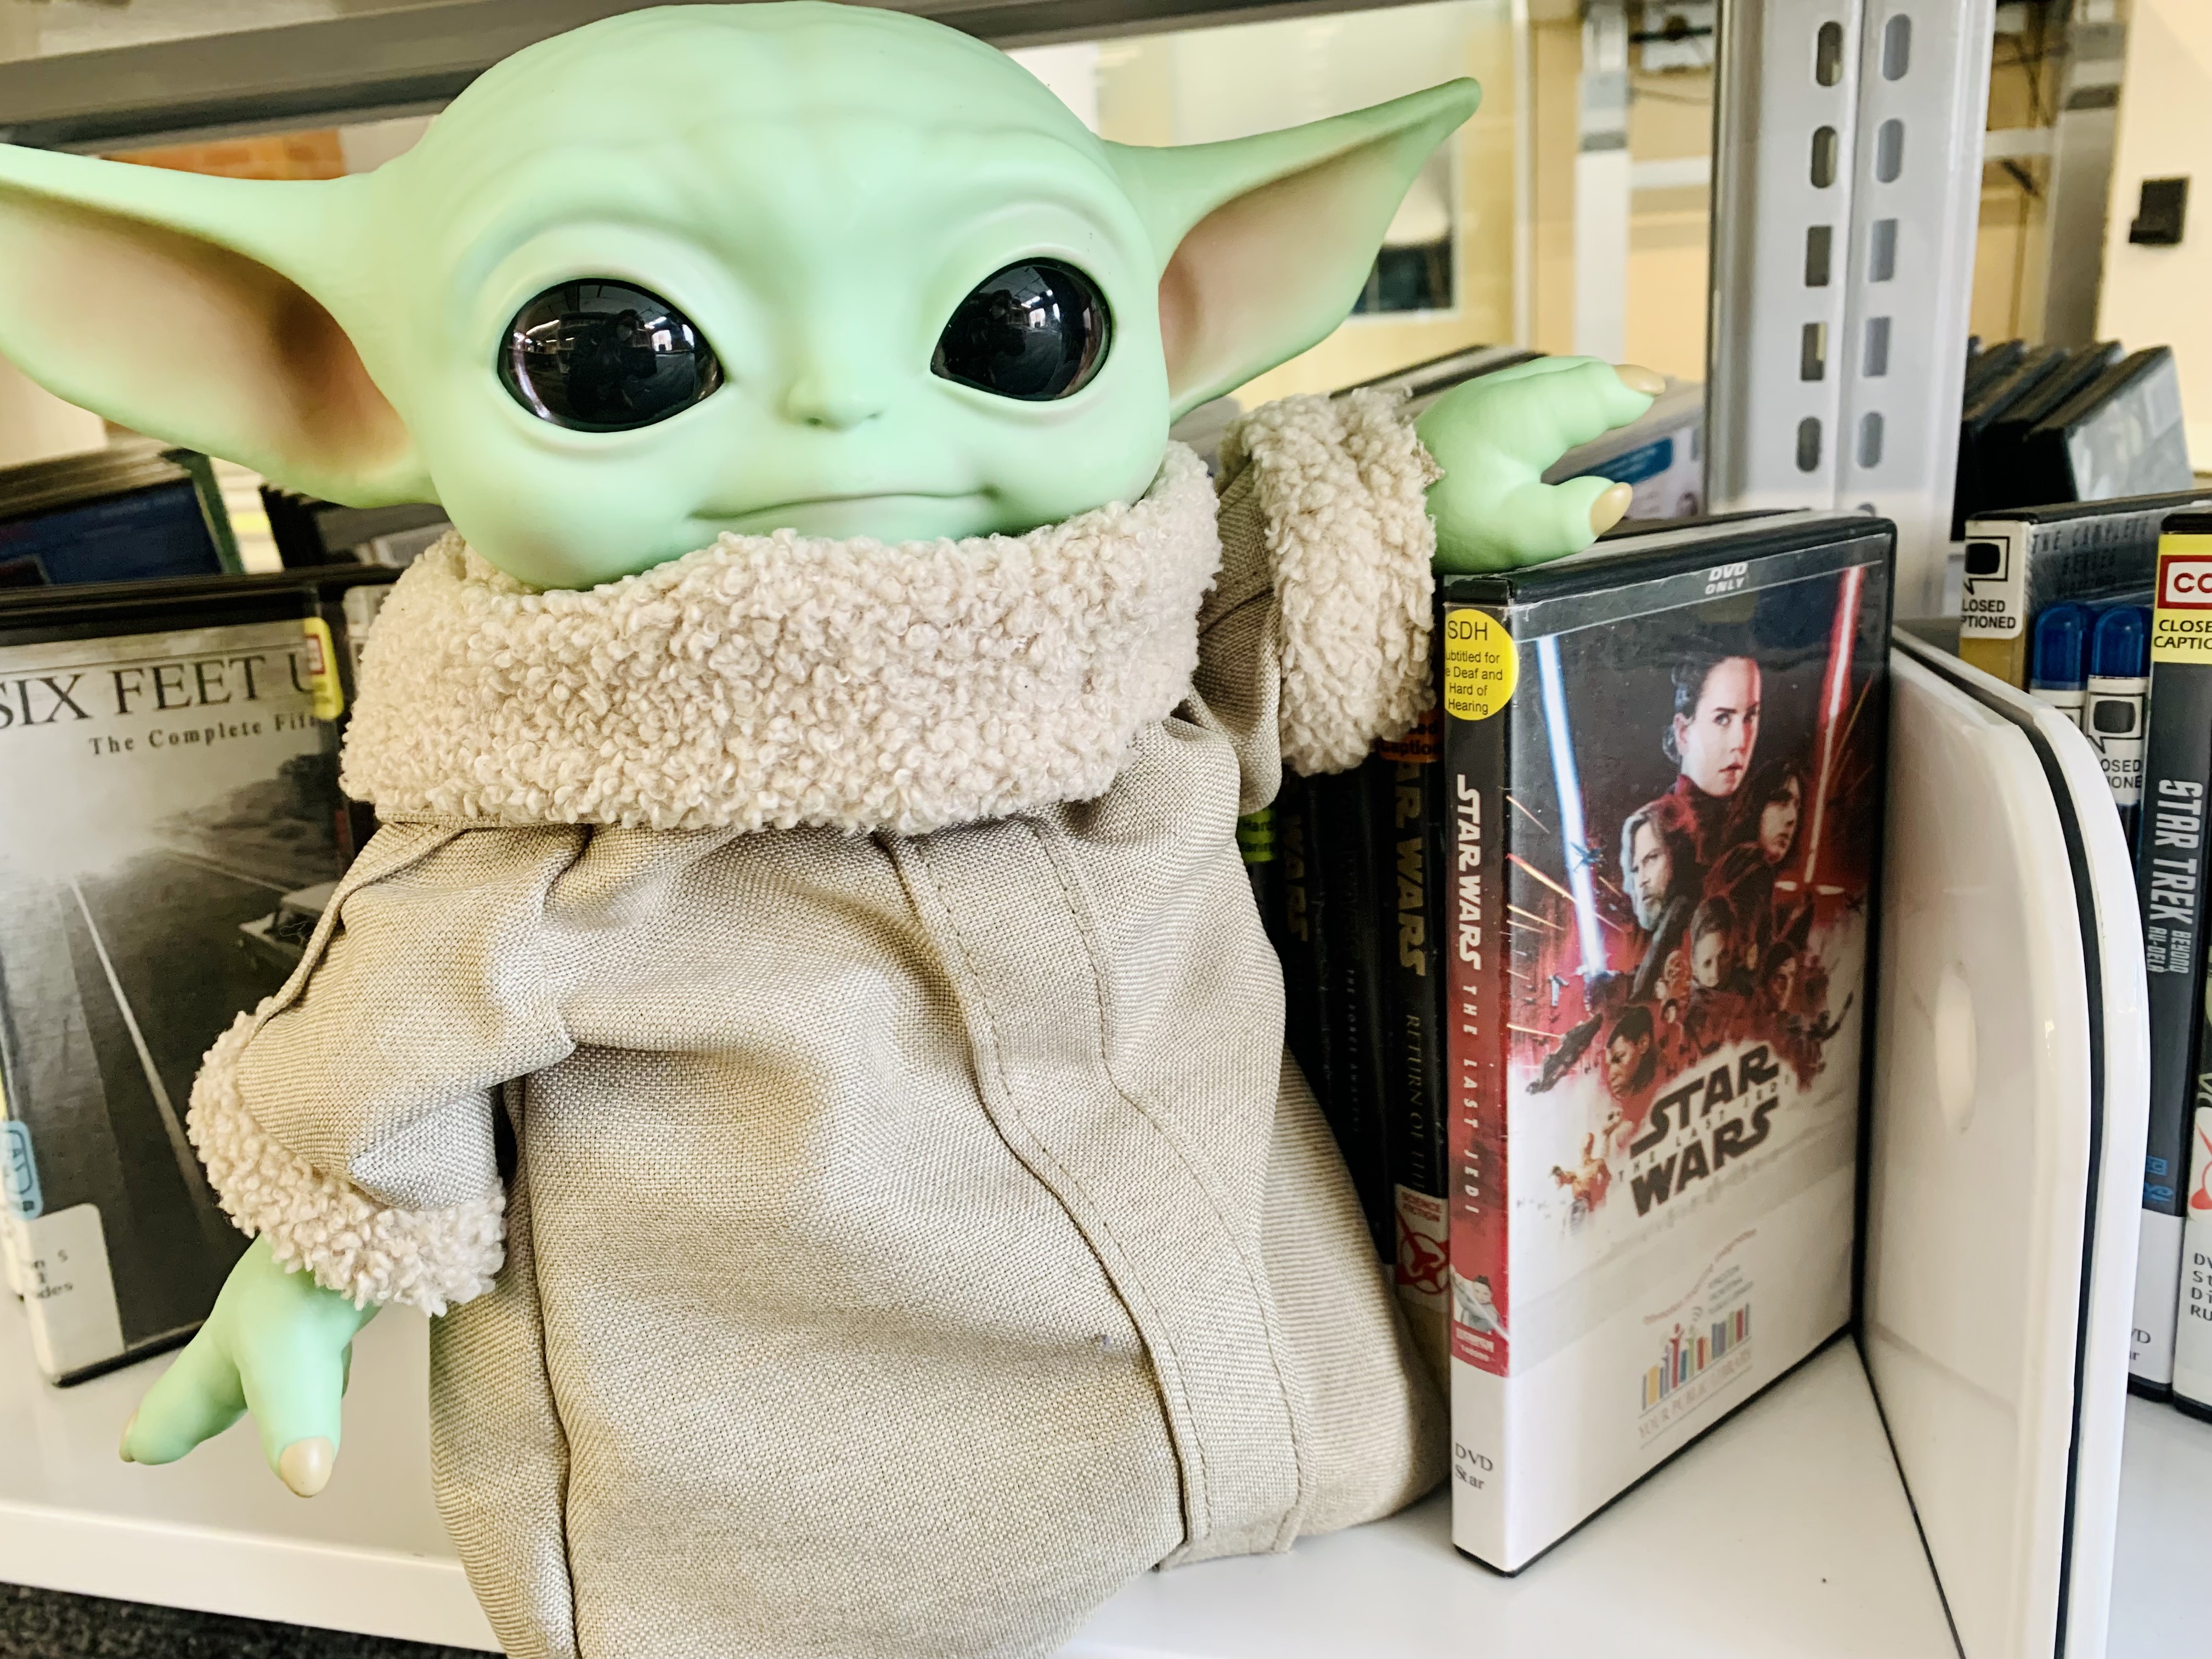 Grogu with a Star Wars DVD on a library shelf.